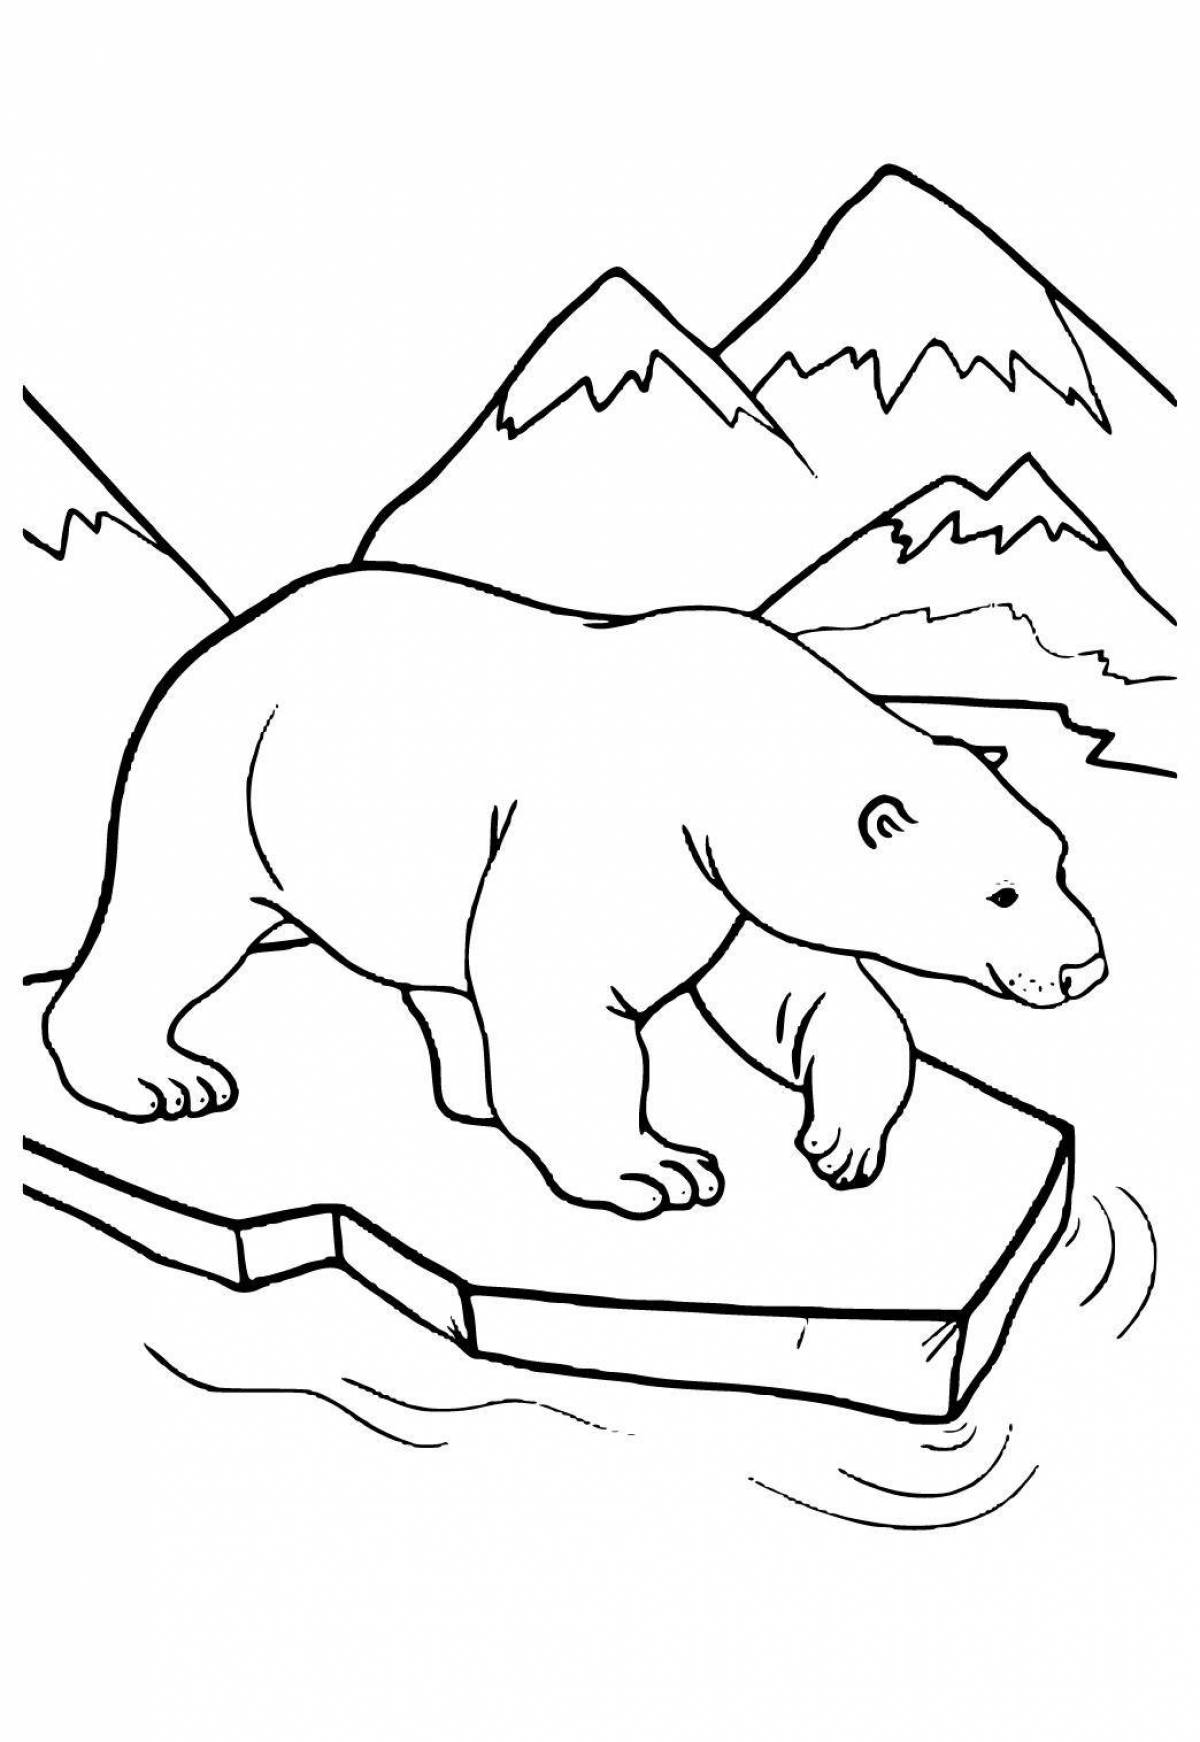 Animated bear in the north coloring book